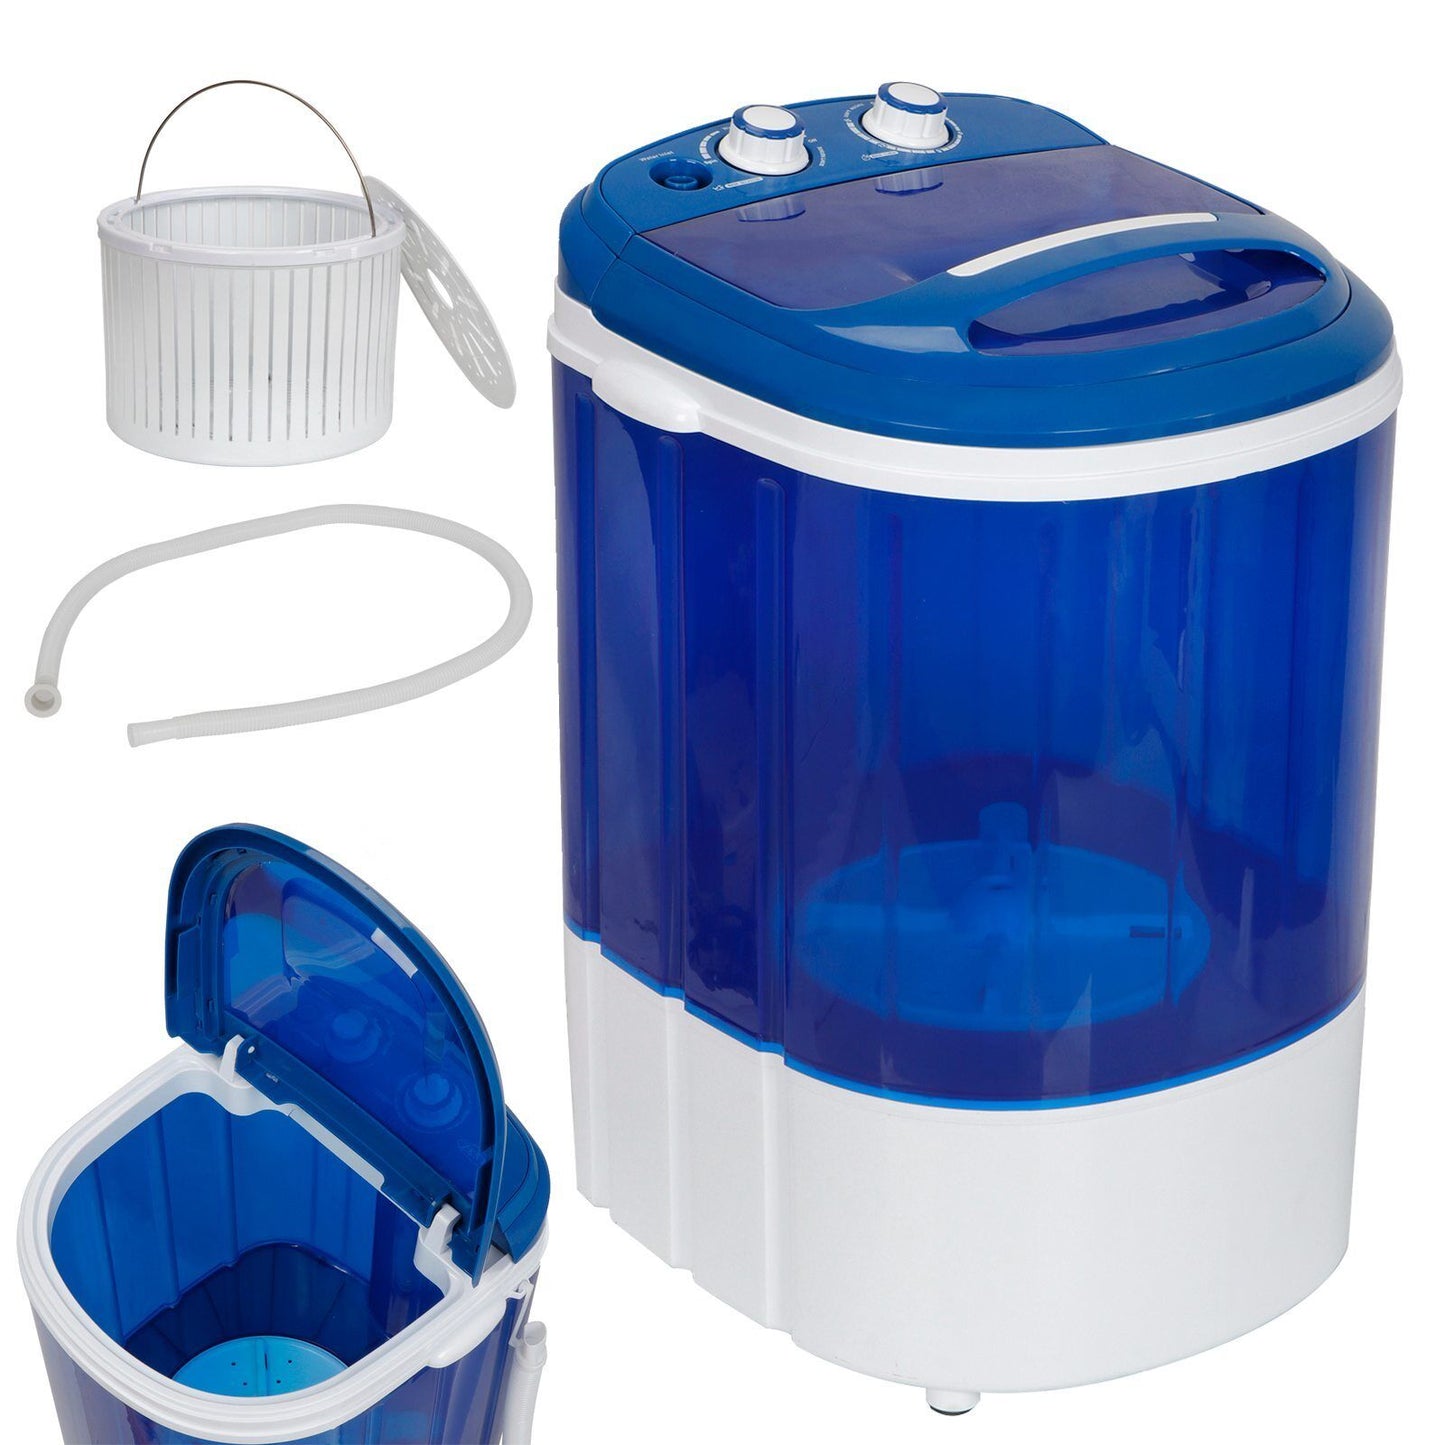 7.9 lbs Portable Compact Mini Washing Machine Laundry Washer Idea for Dorm Rooms